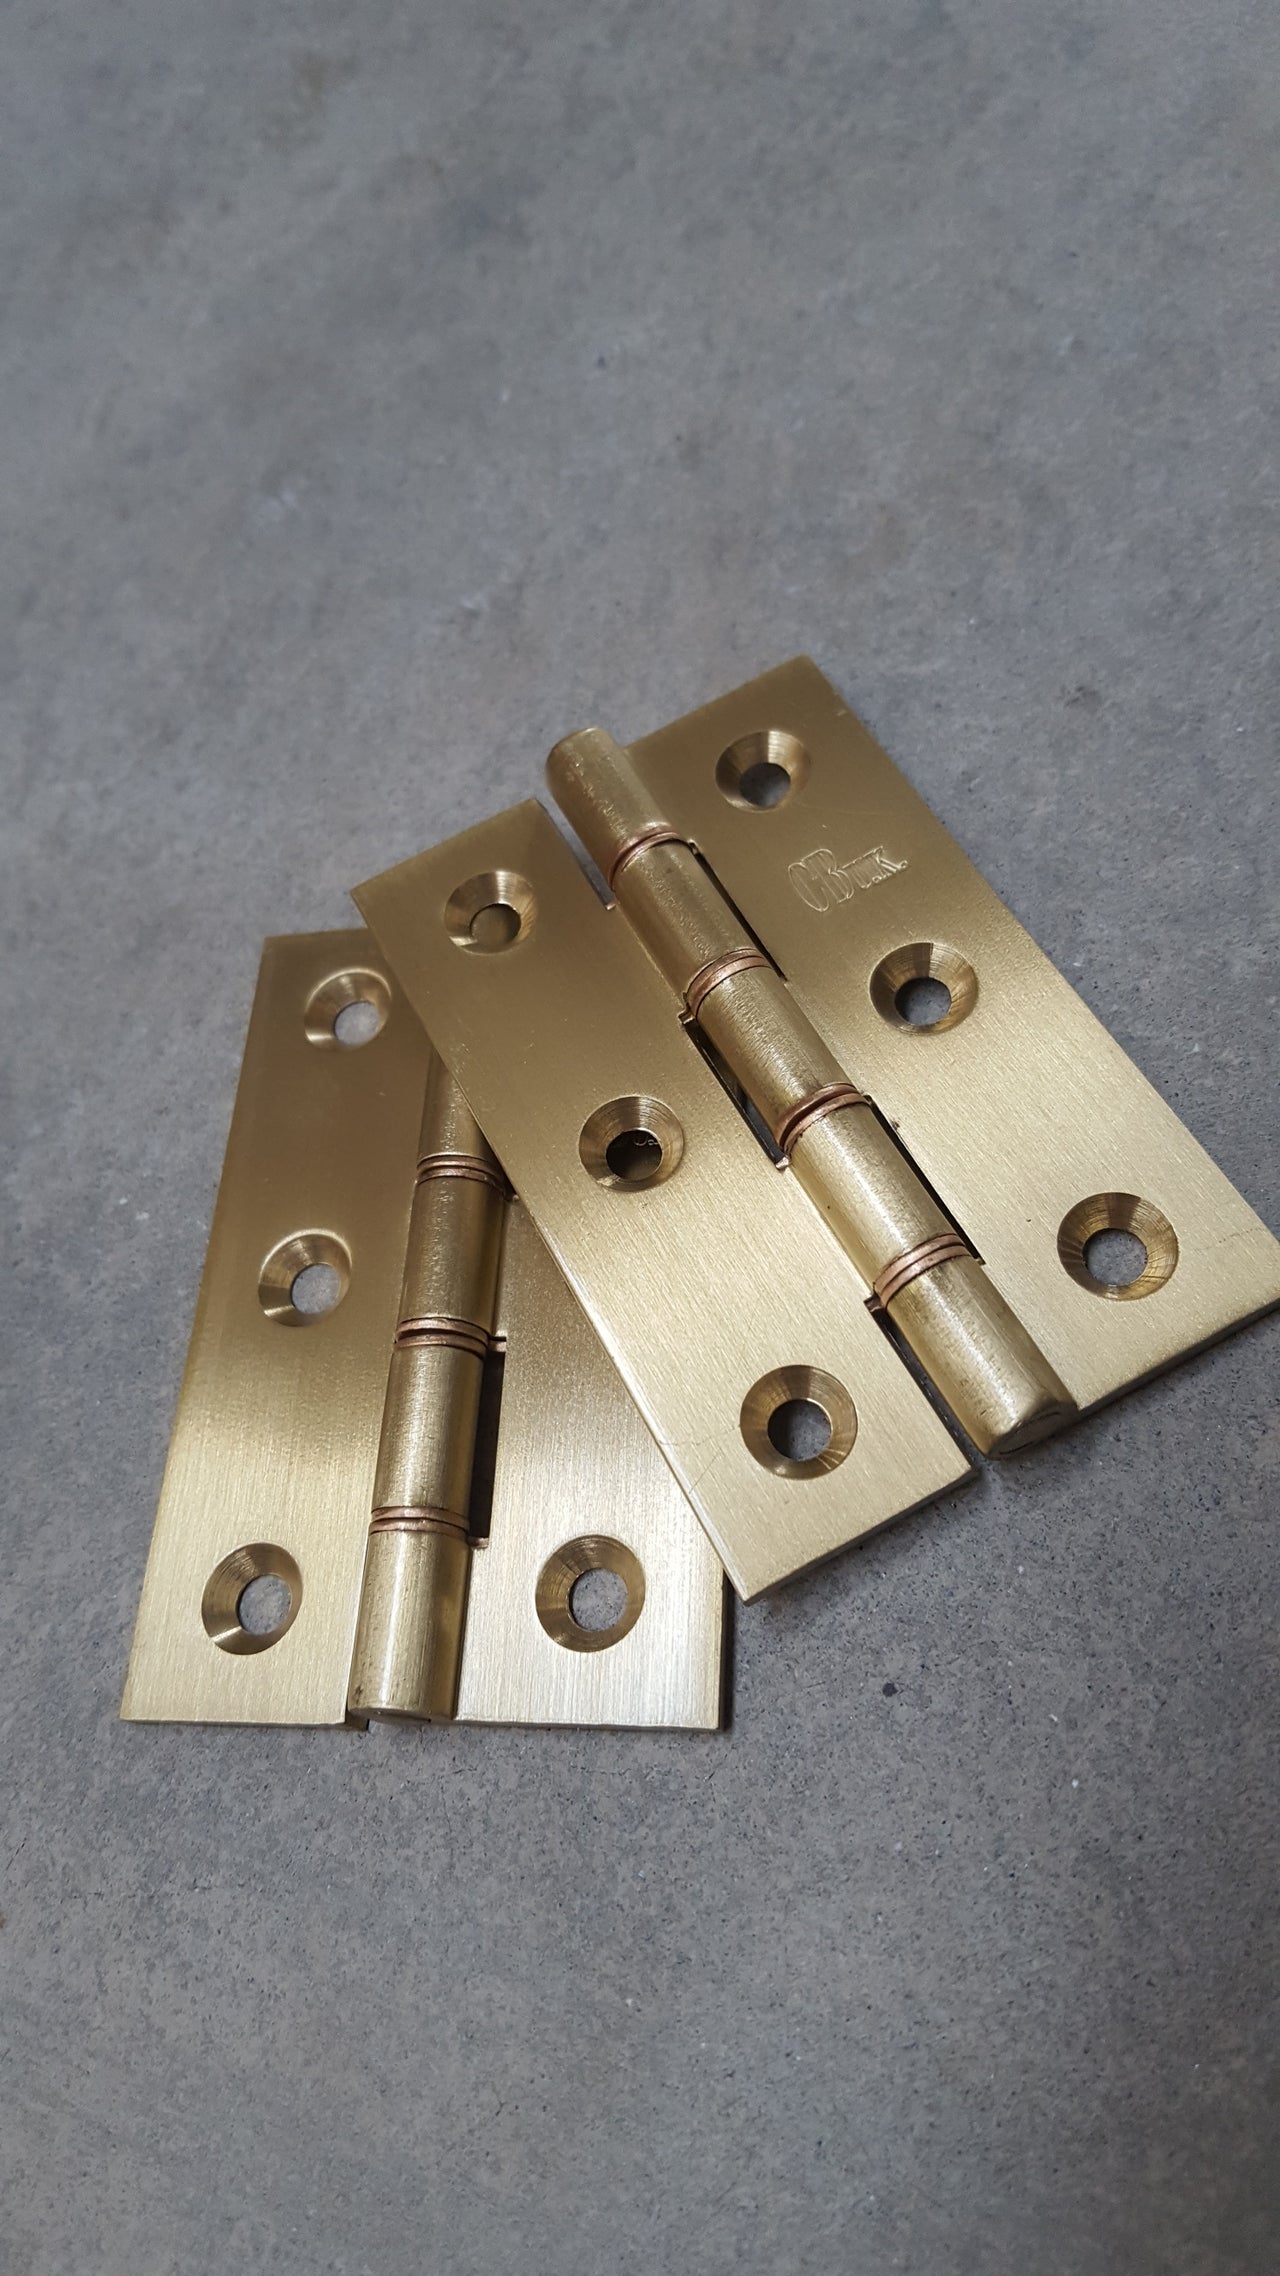 SATIN BRASS HINGES 76mm x 50mm x 2.5mm DOUBLE BRONZE WASHERED 